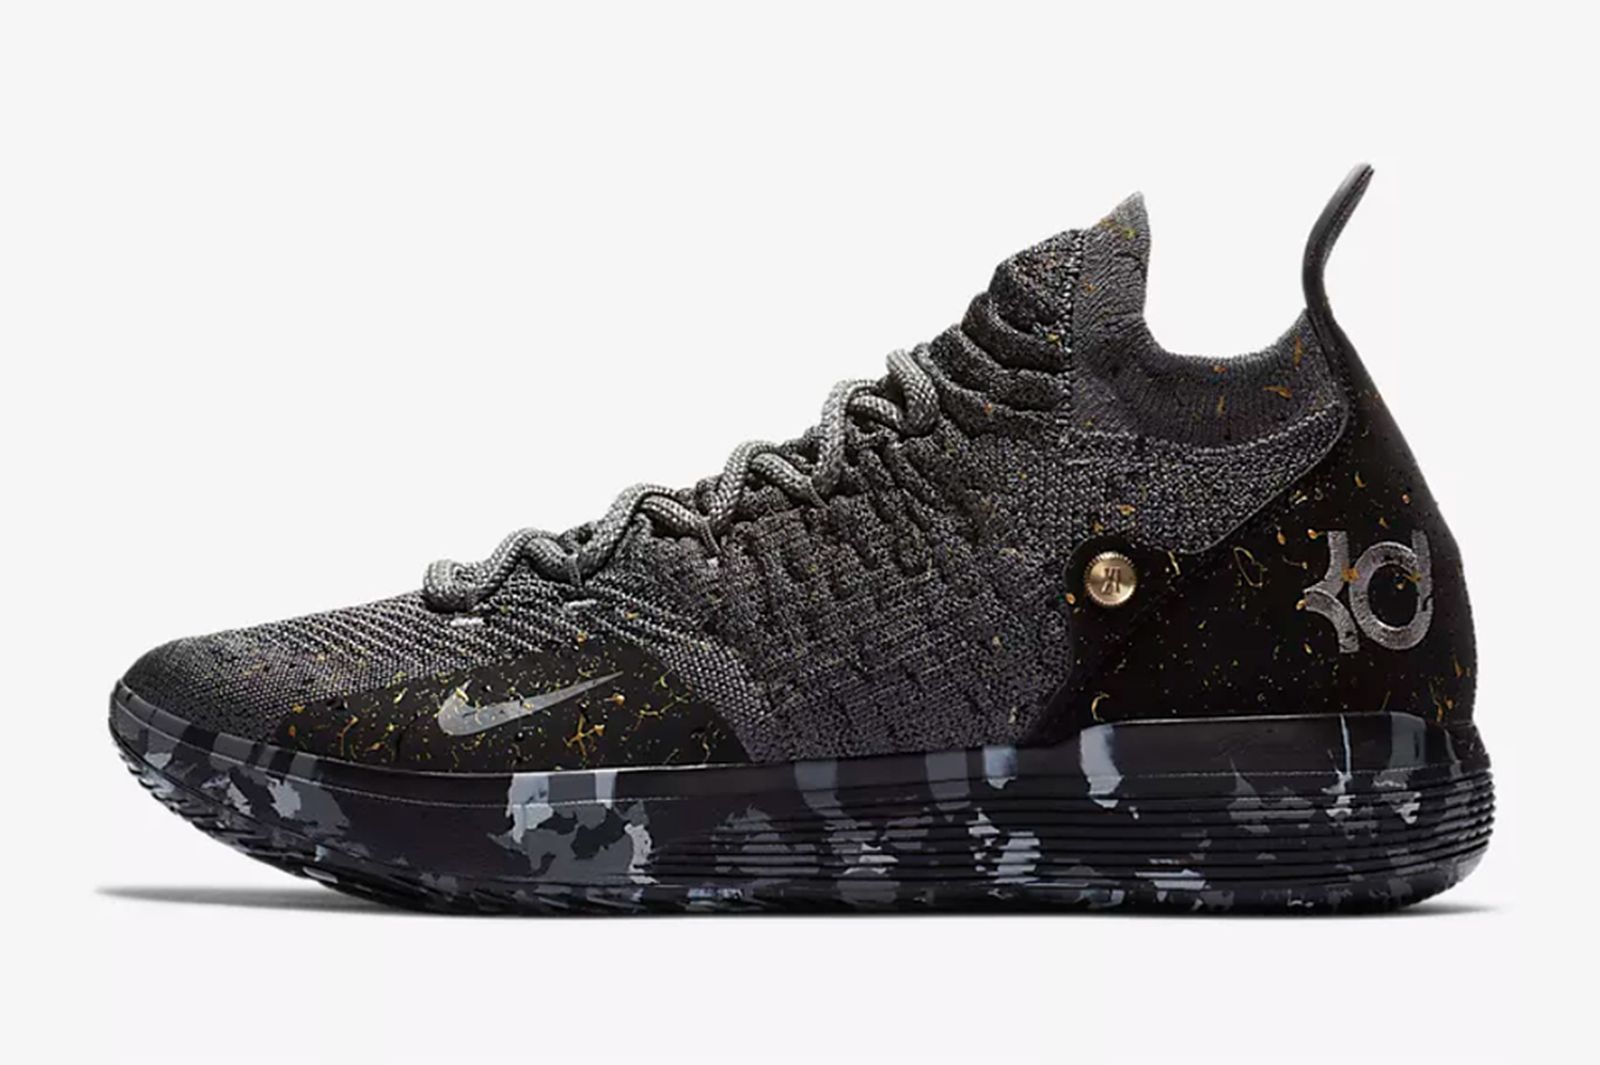 Nike Drops a New Selection of Camouflage Sneakers